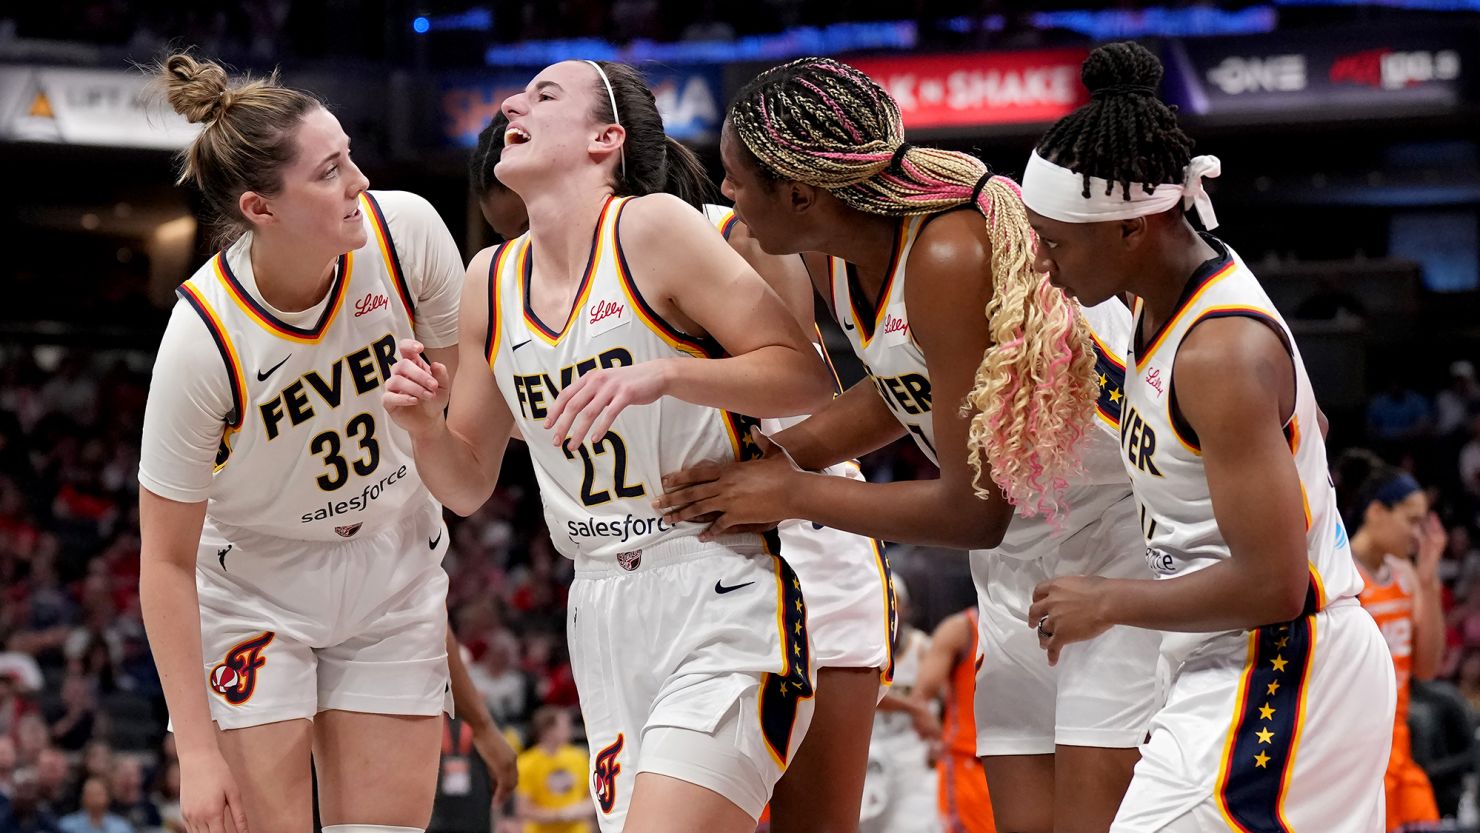 Caitlin Clark battles through ankle injury as Indiana Fever falls to fourth consecutive WNBA loss | CNN